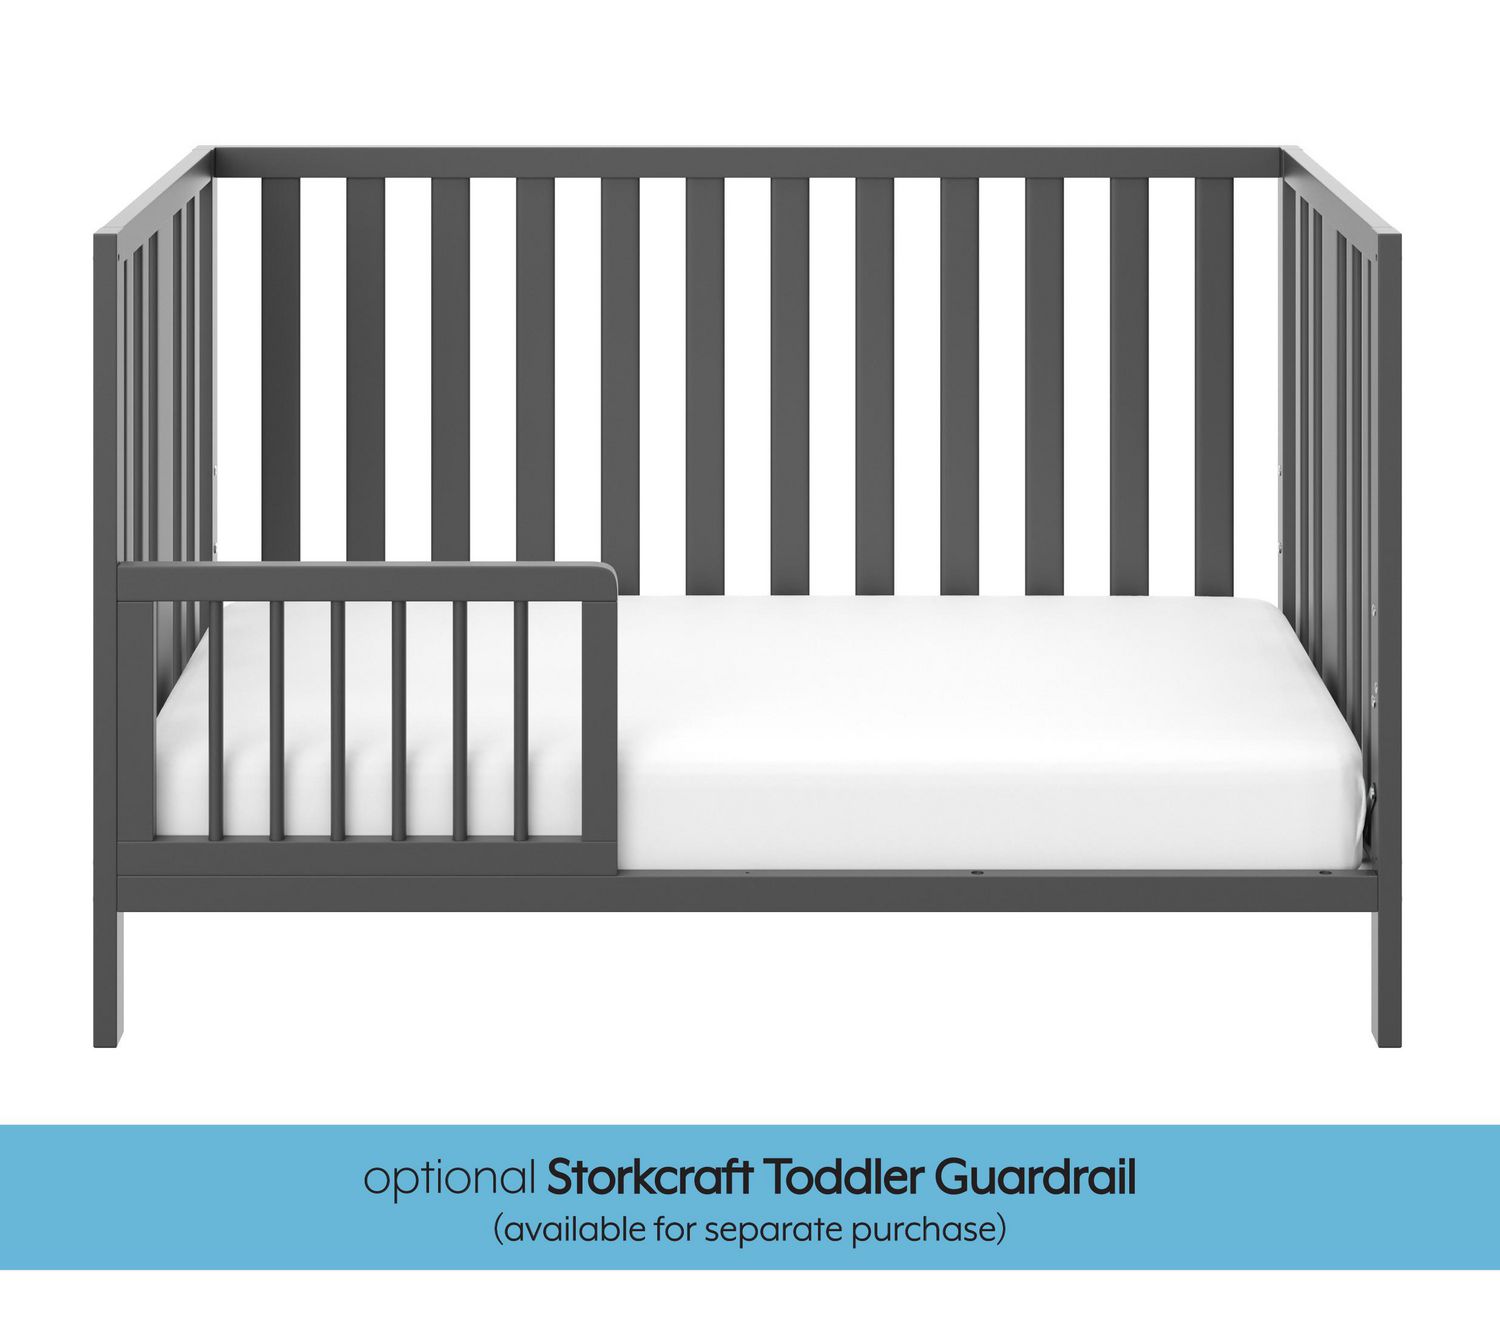 Storkcraft Pacific 4-in-1 Convertible Crib